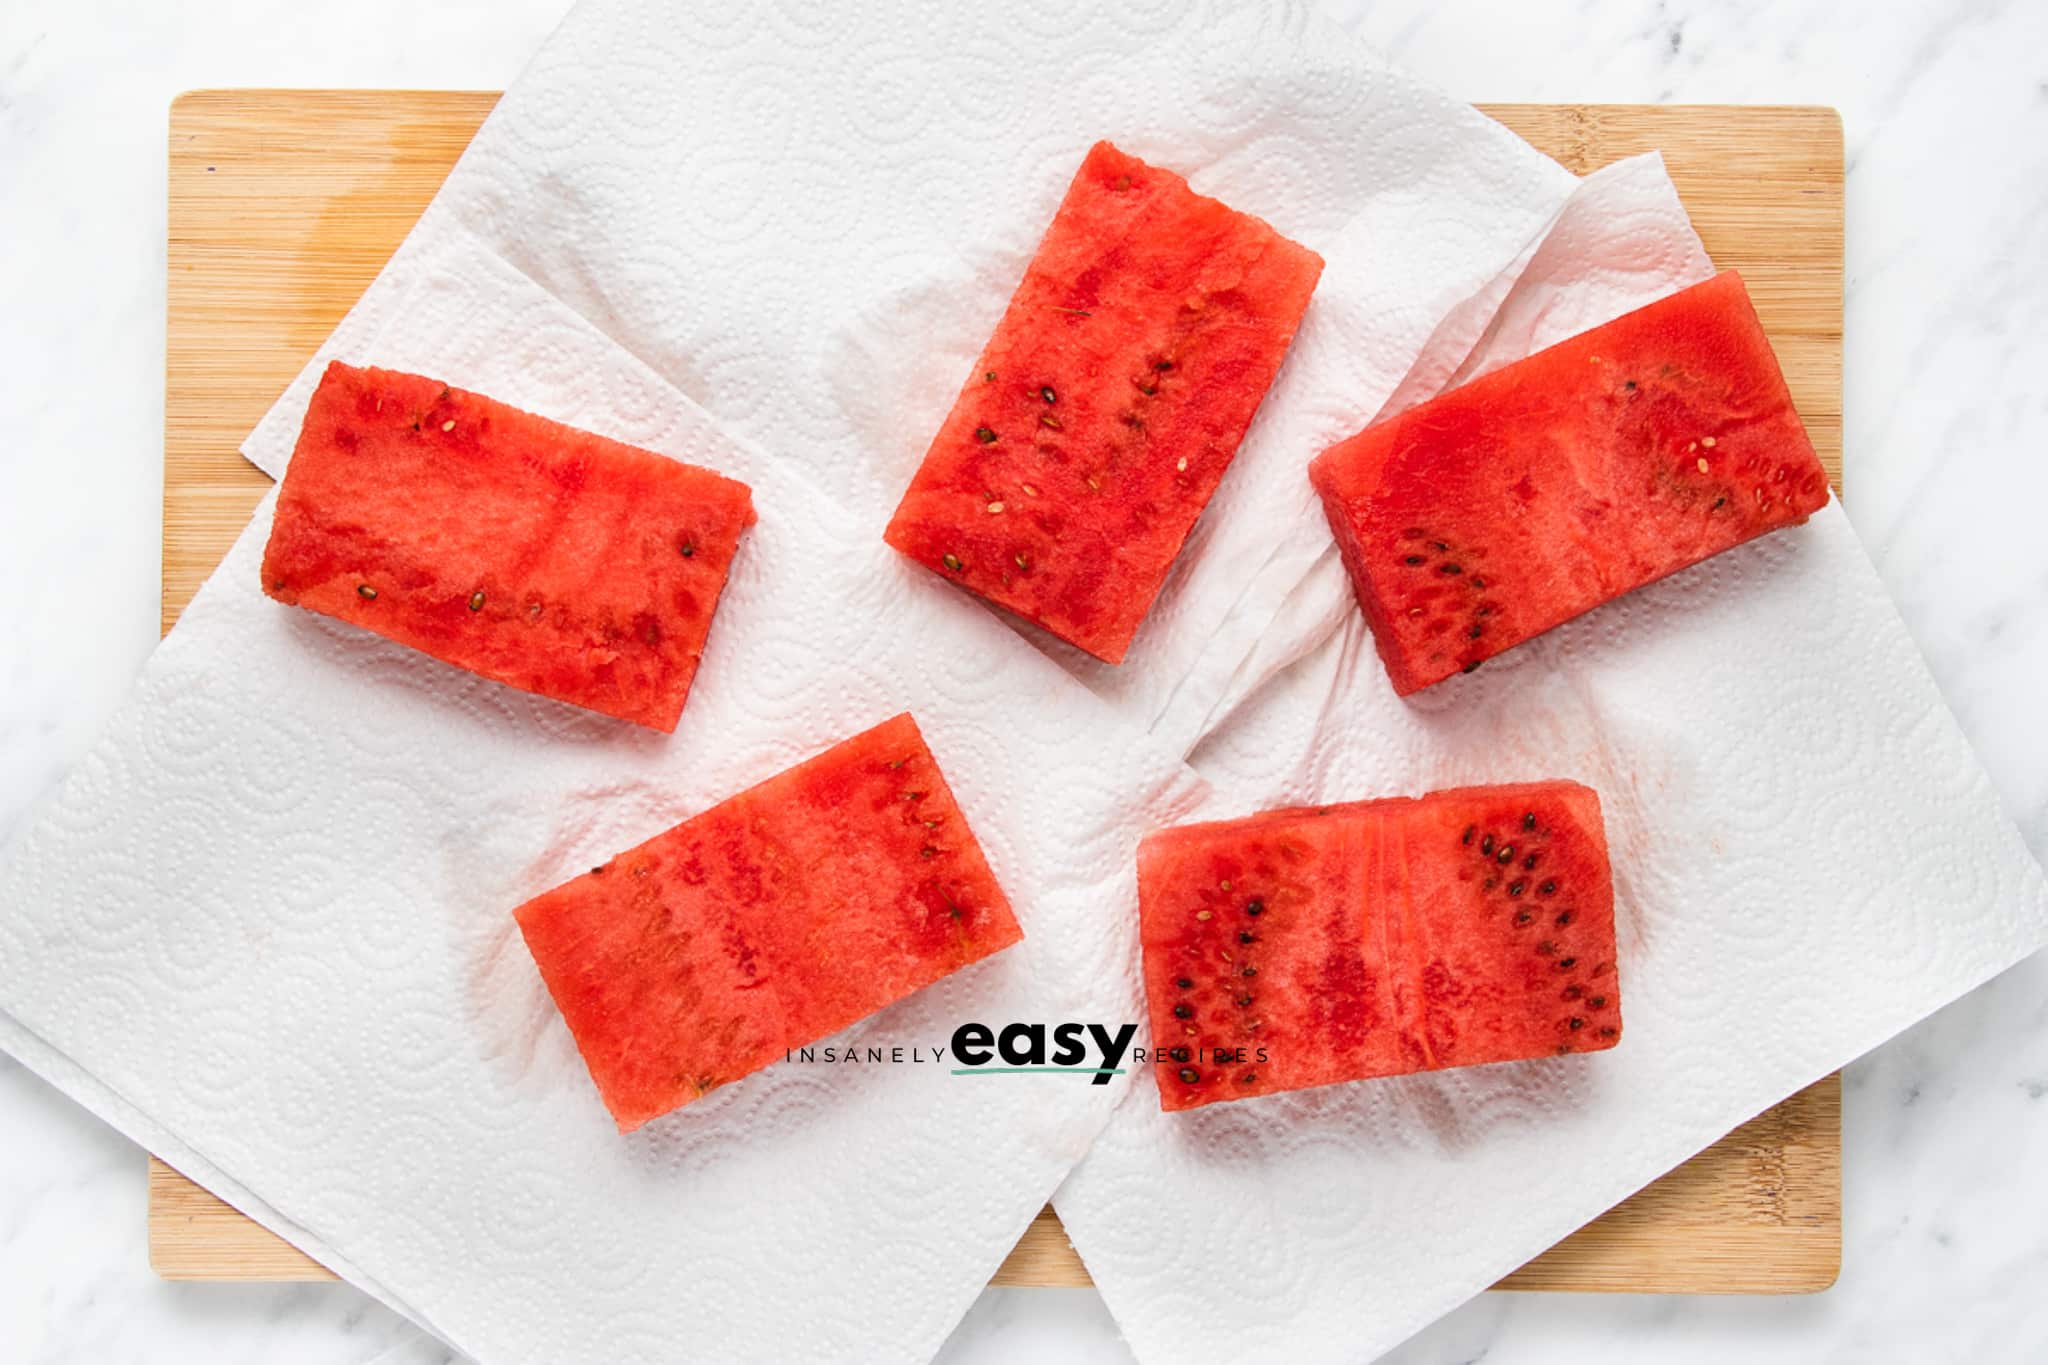 watermelon planks drying on paper towels